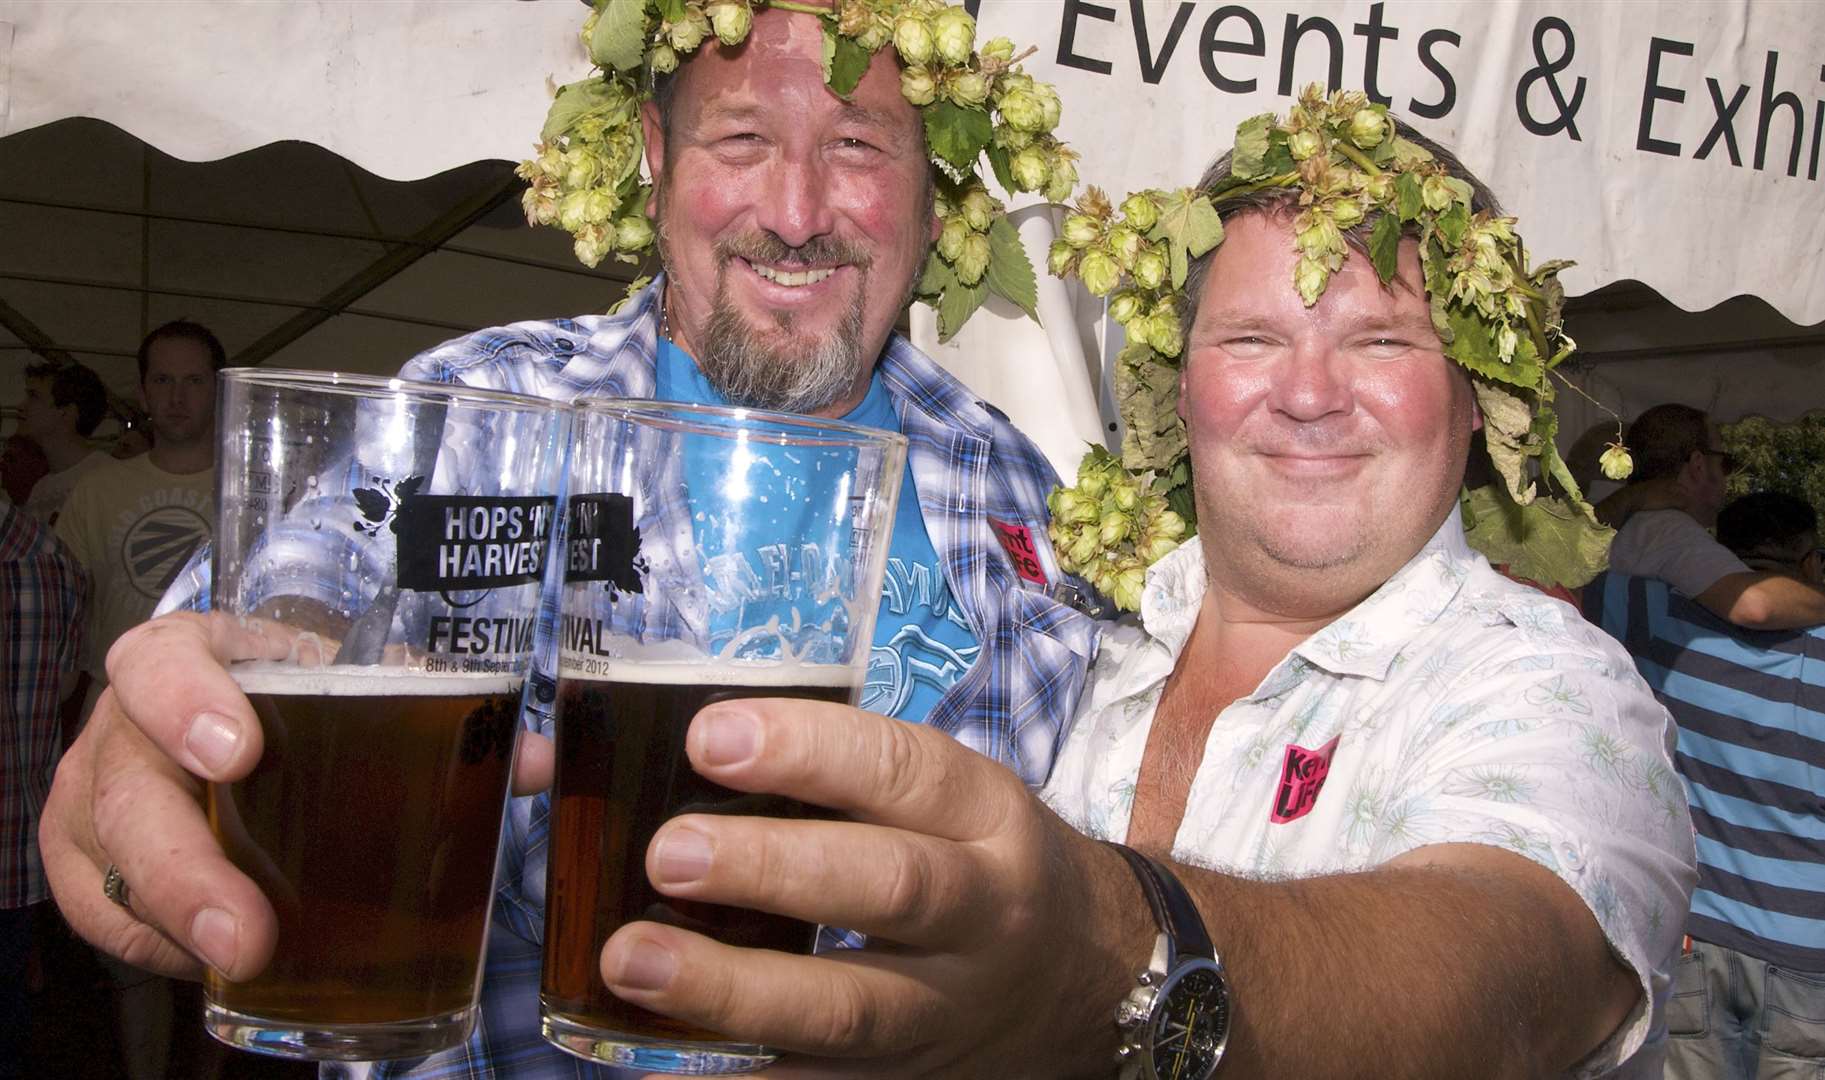 The Hops ‘n’ Harvest Beer Festival will include up to 50 varieties of beer and cider.